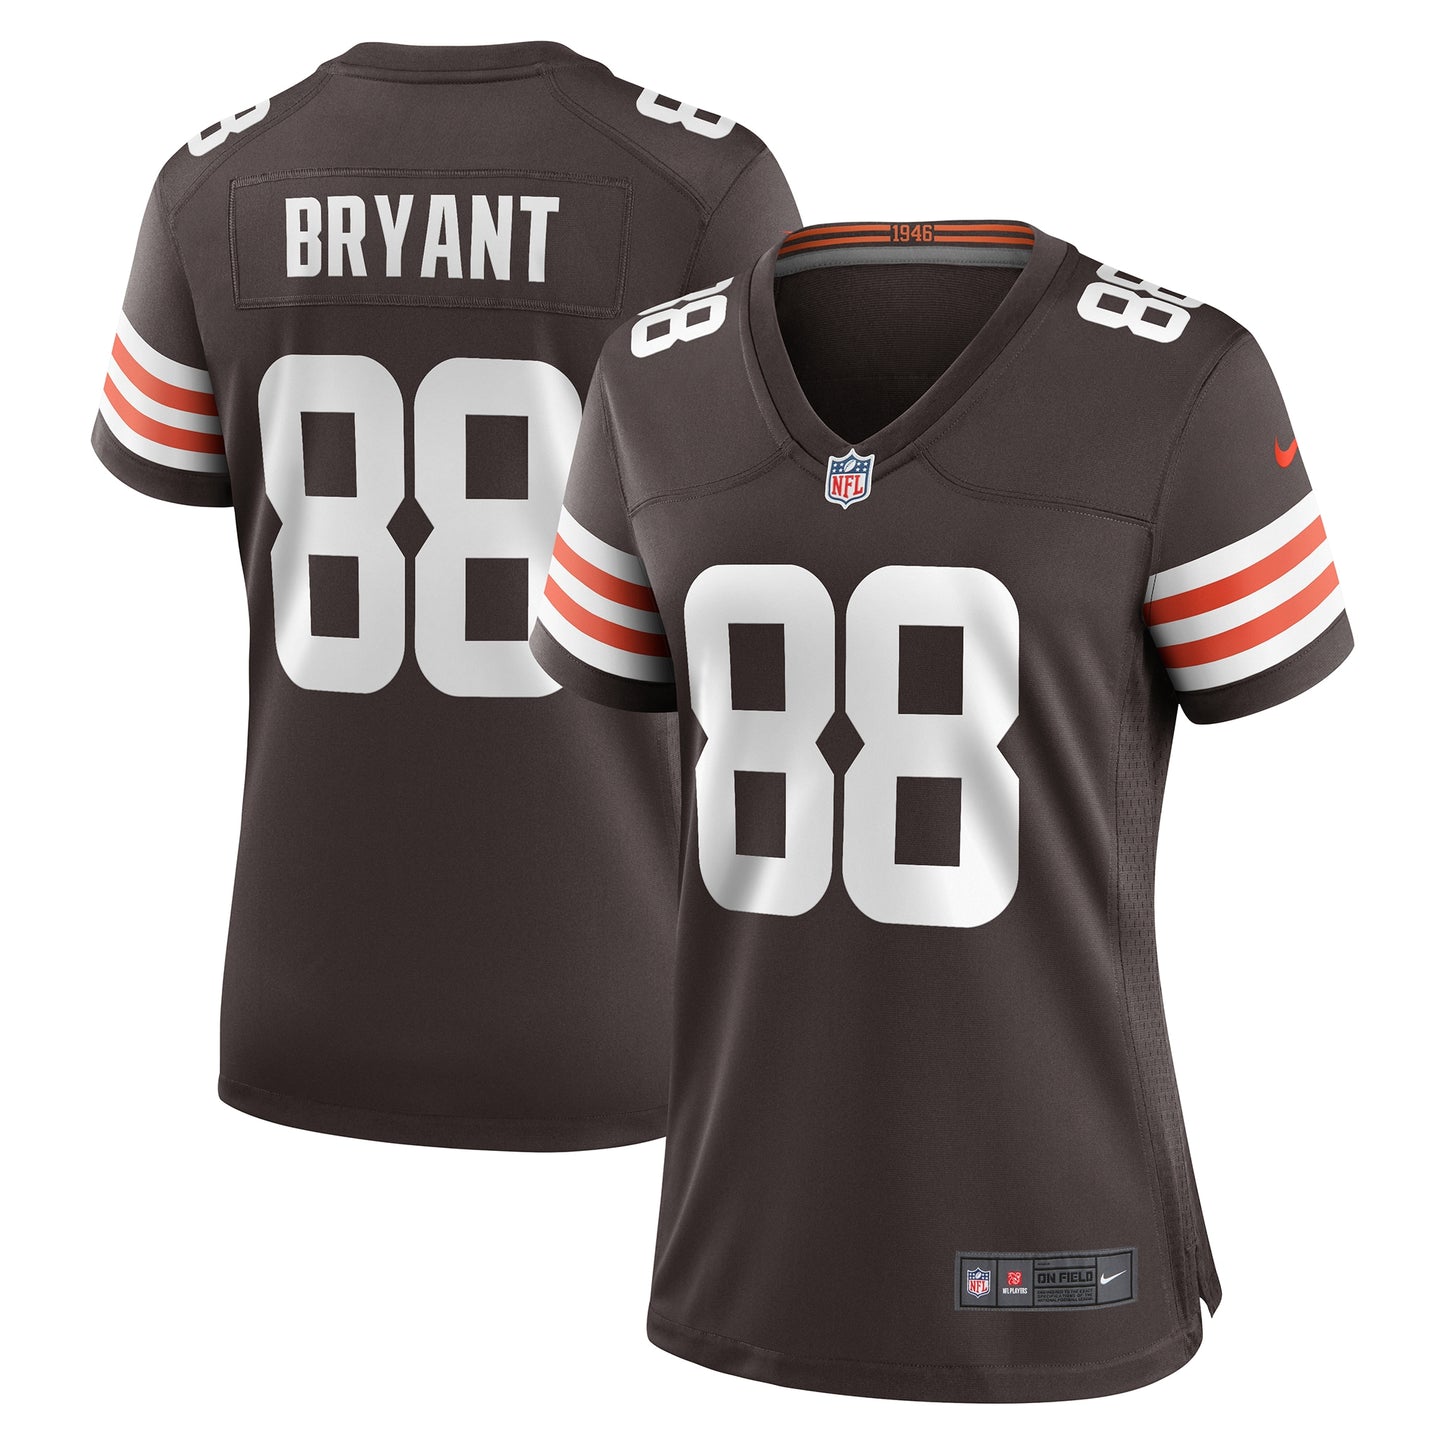 Harrison Bryant Cleveland Browns Nike Women's Game Jersey - Brown